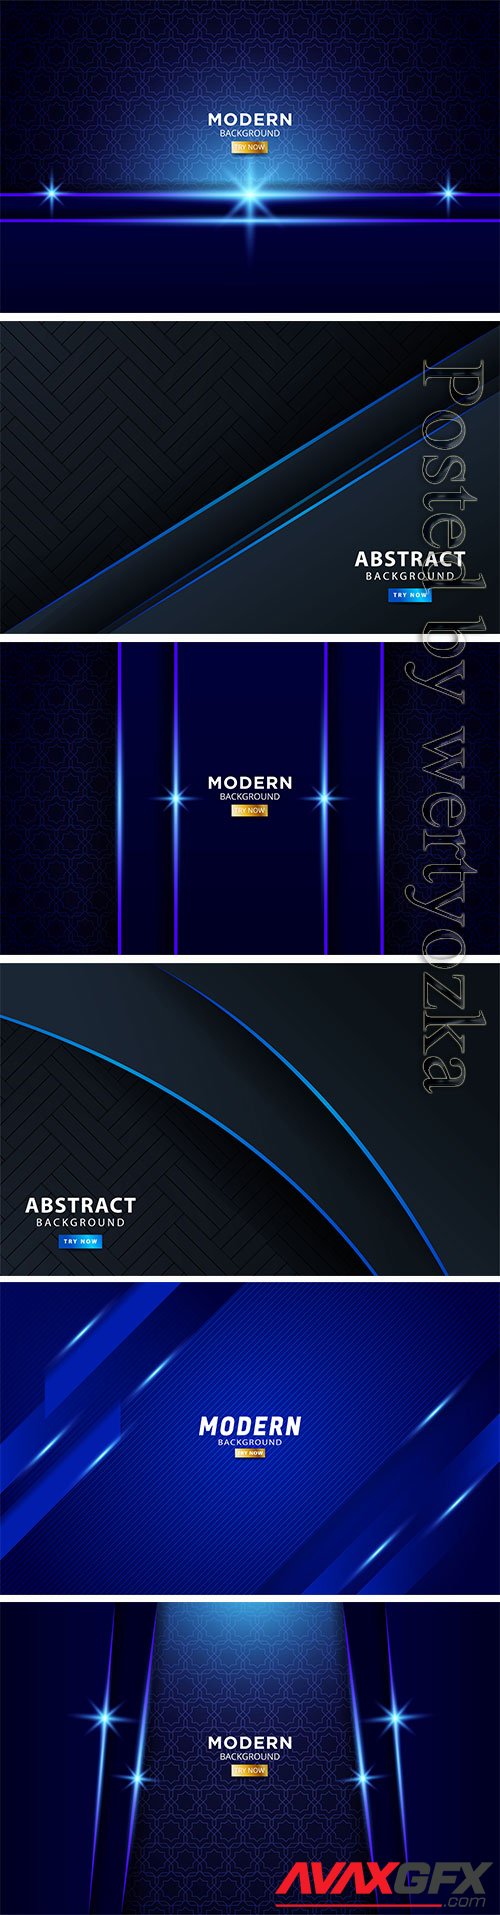 Abstract background with blue light